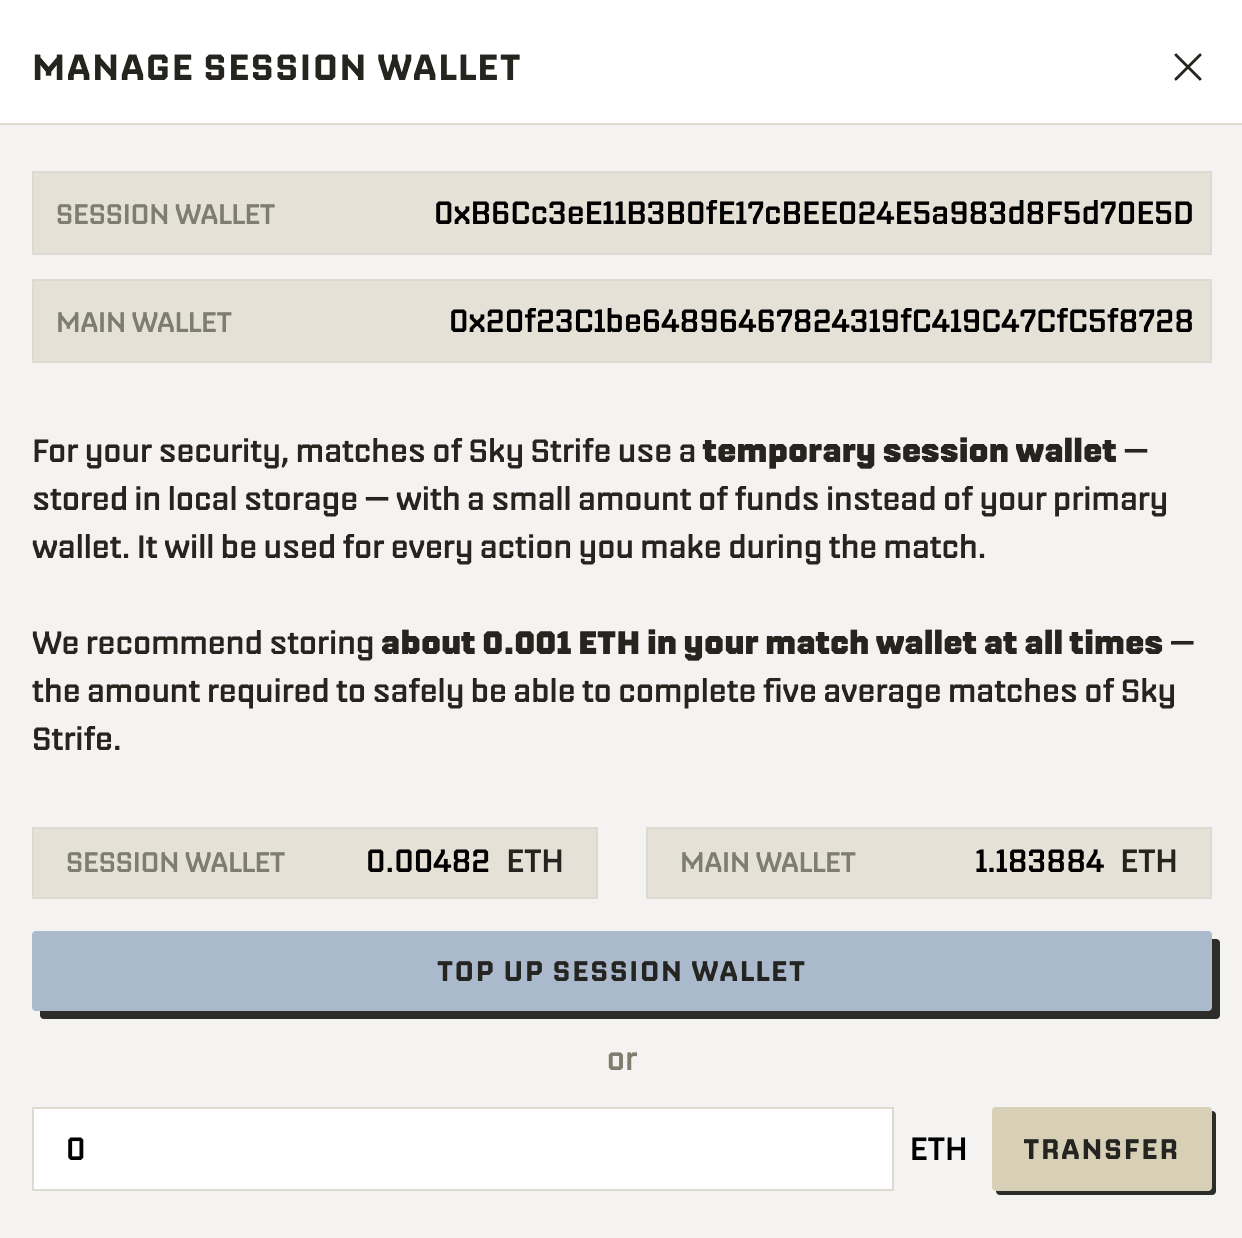 Where you can top up your burner wallet.